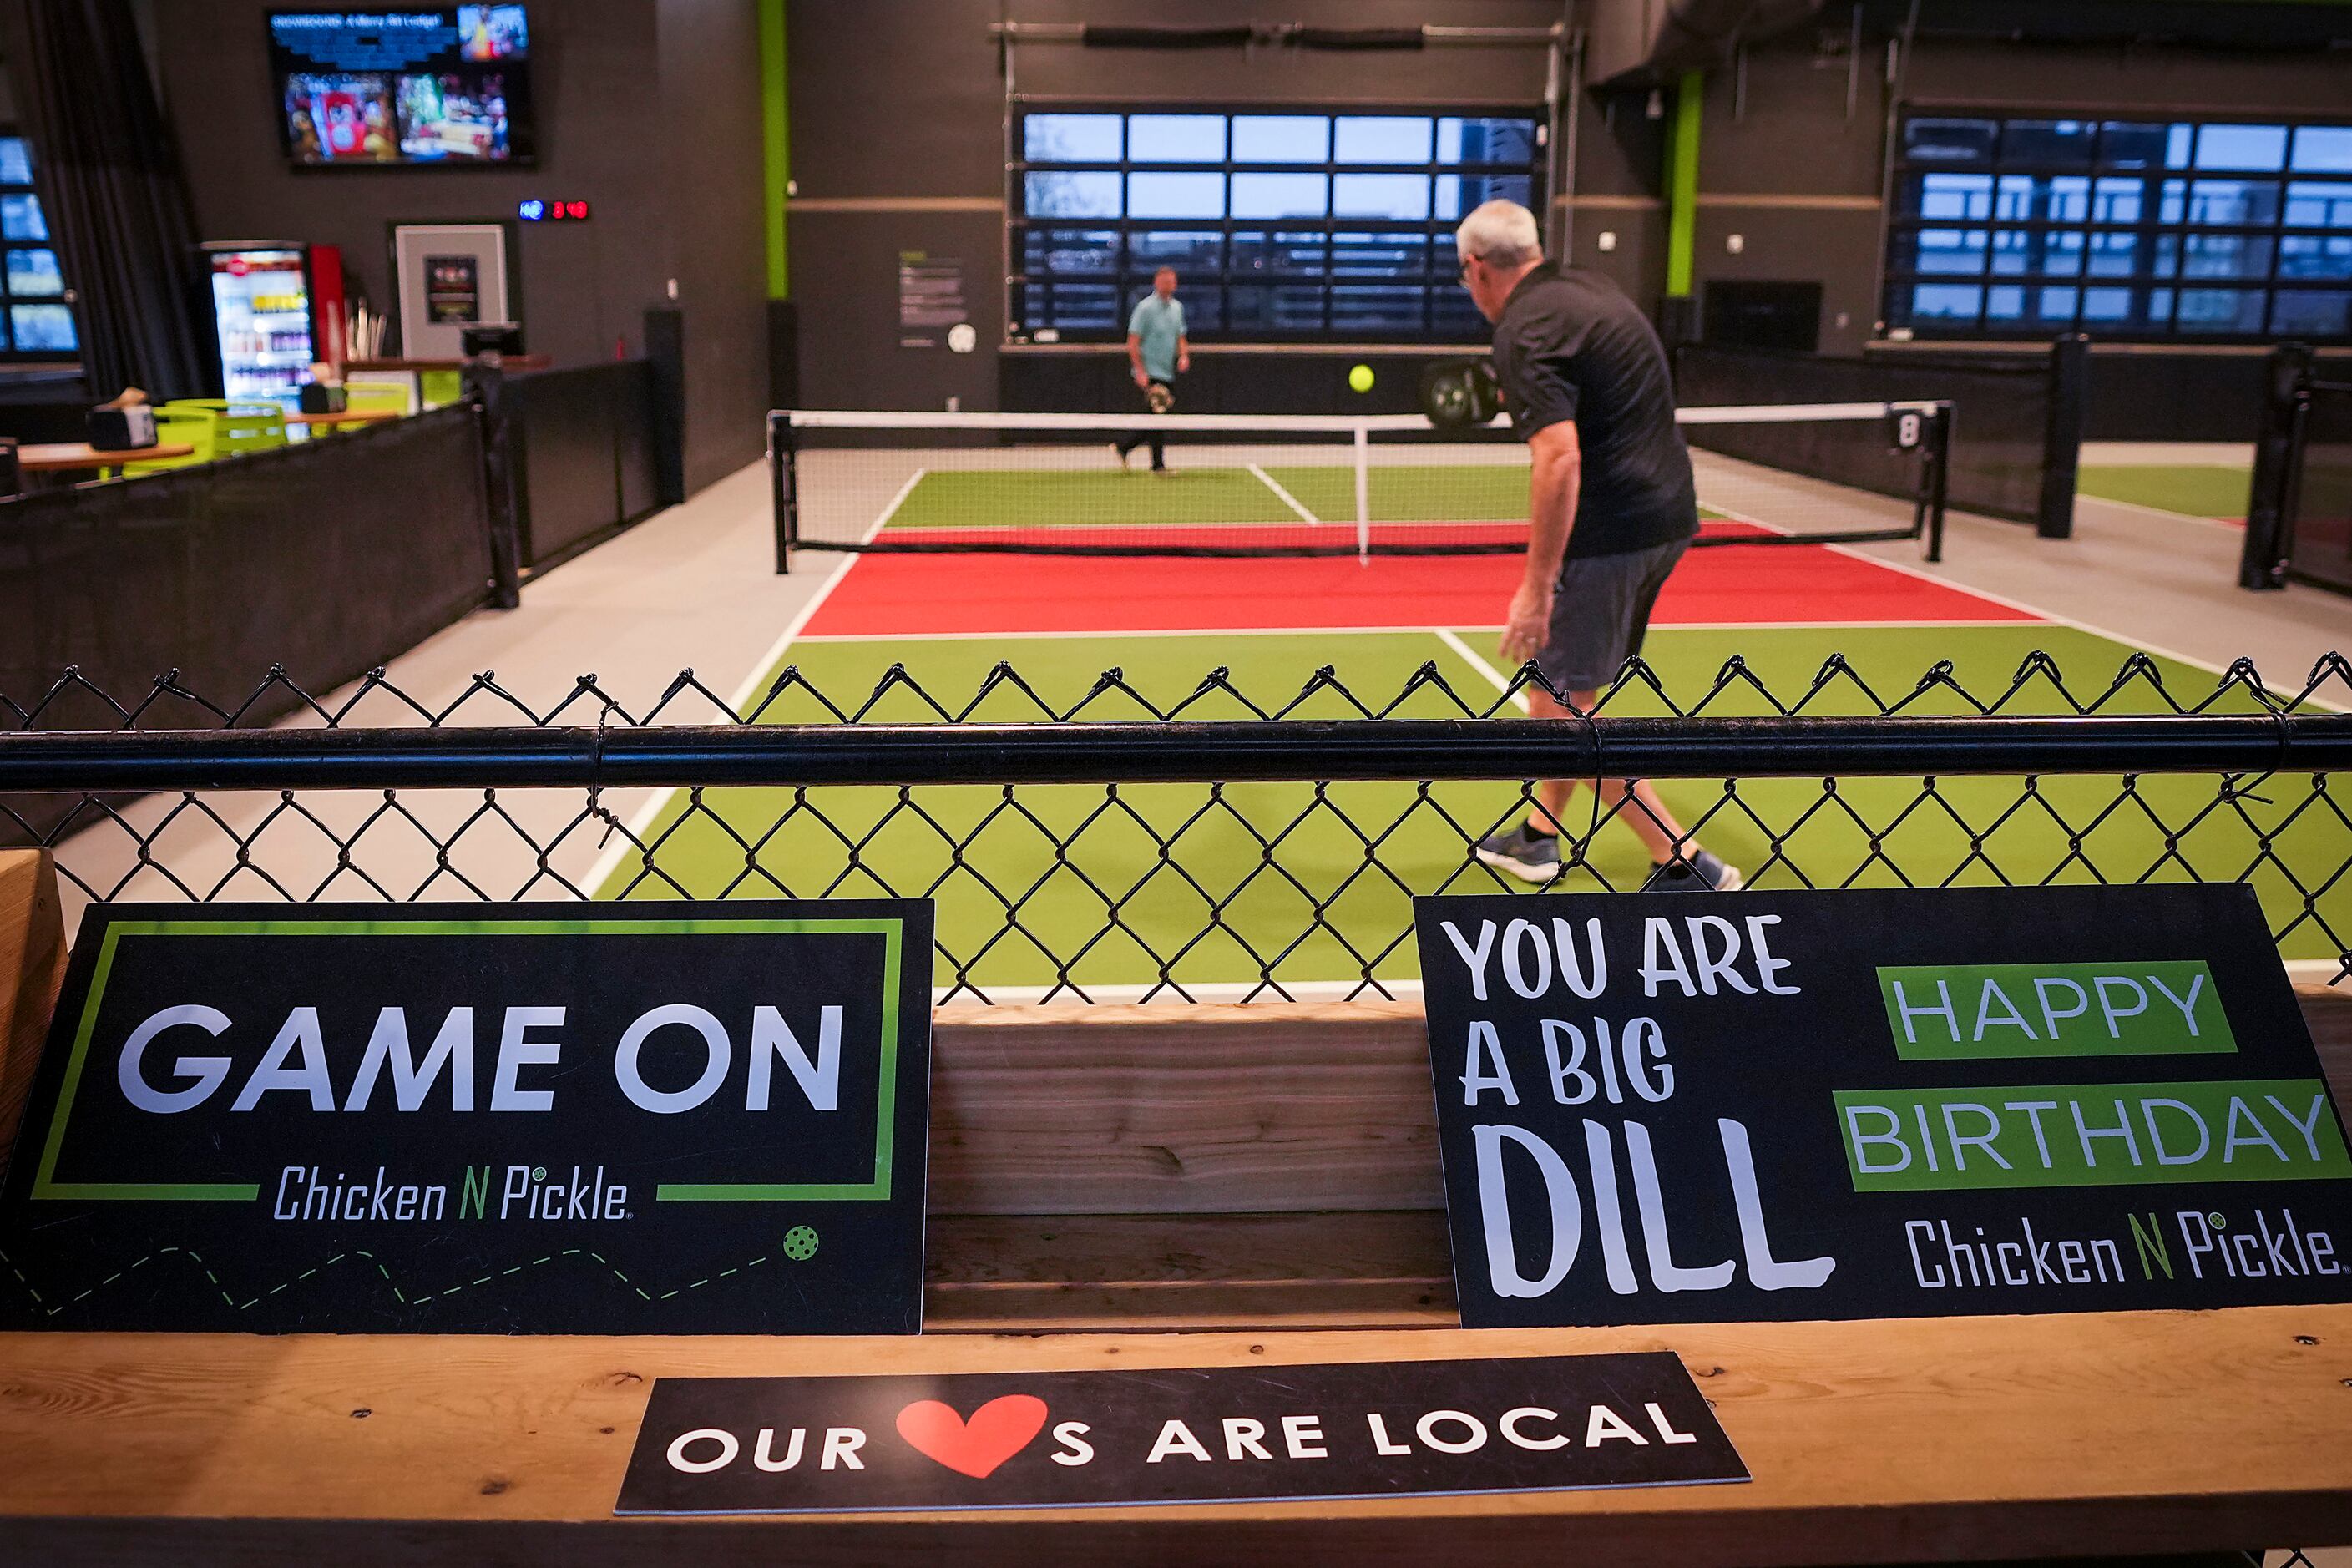 Patrons play pickleball at Chicken N Pickle on Friday, Dec. 9, 2022, in Grand Prairie.